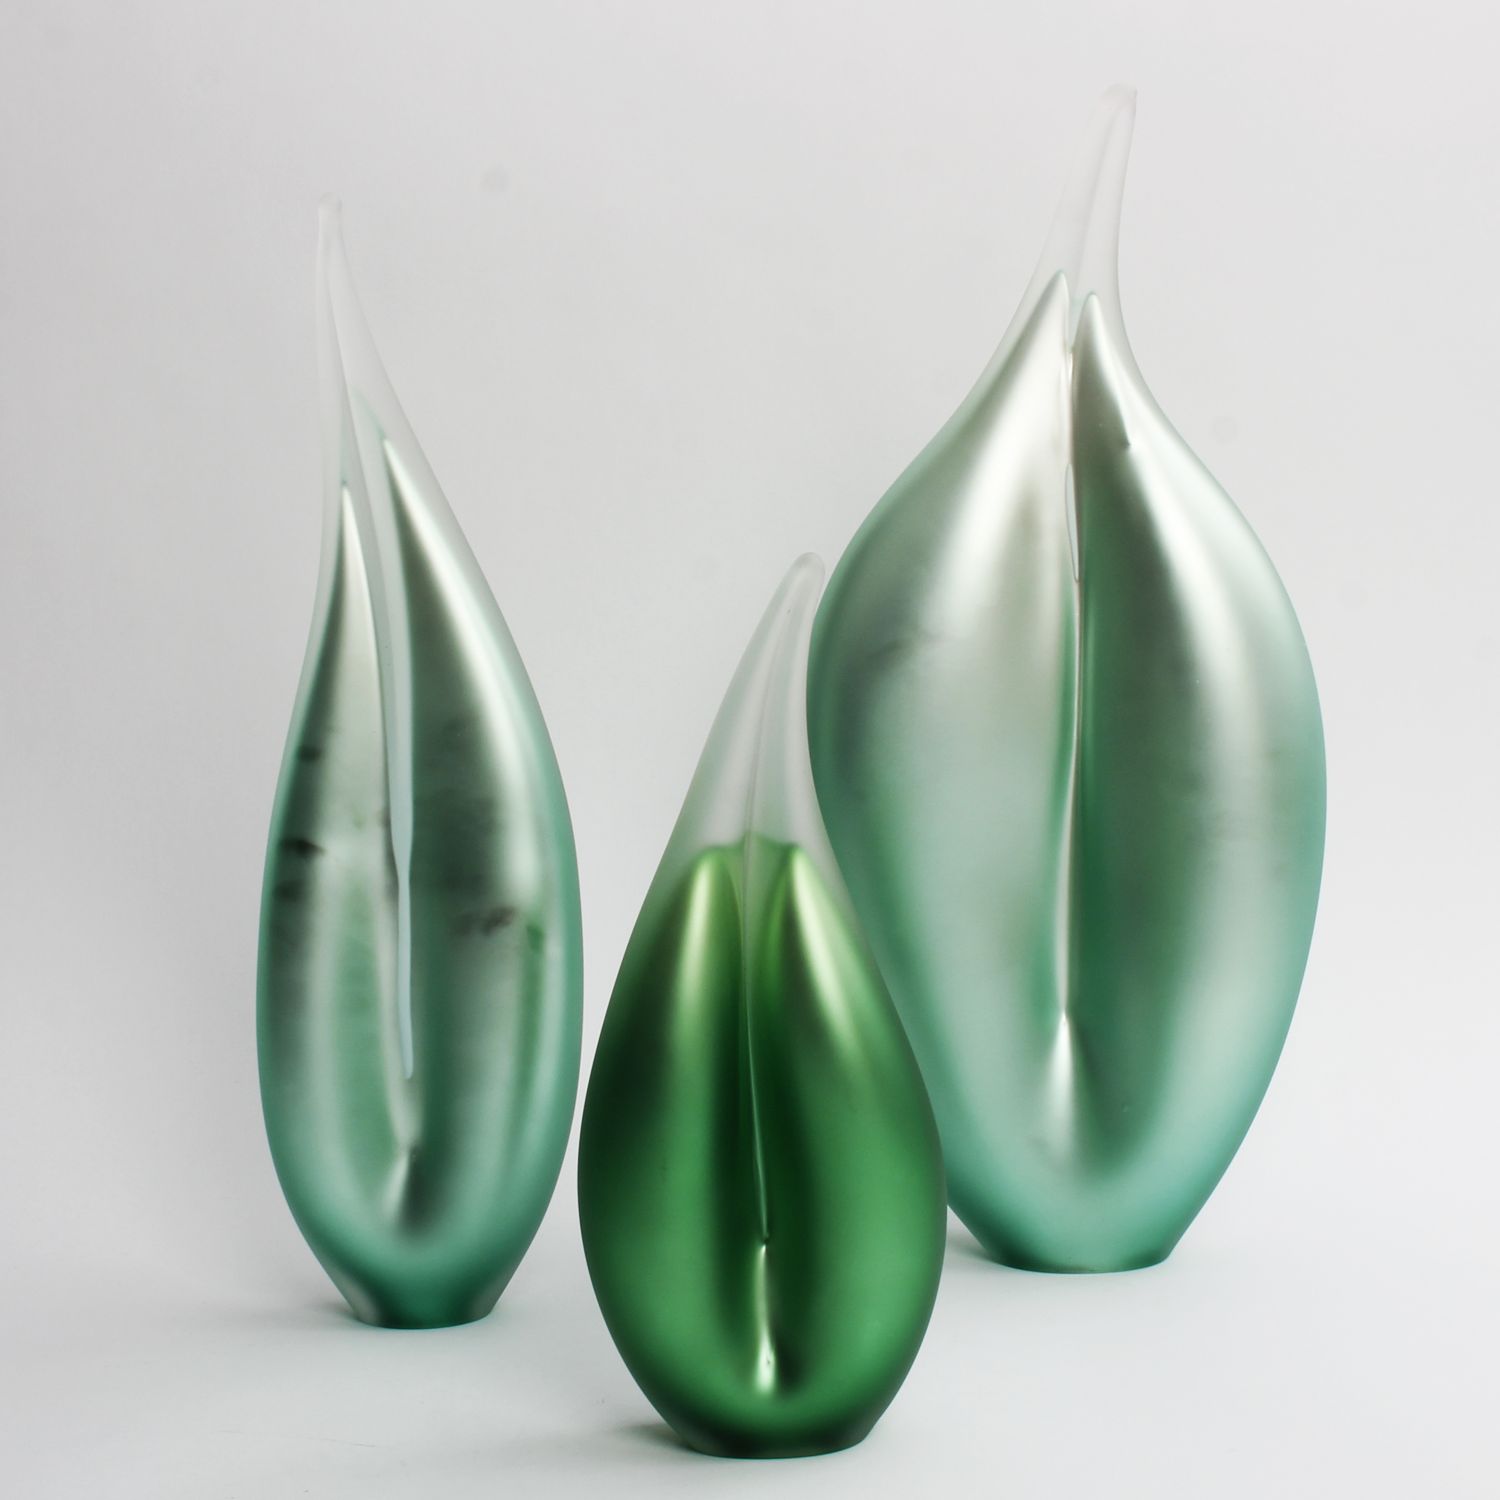 Soffi Studio: Large Green Flame Product Image 2 of 2